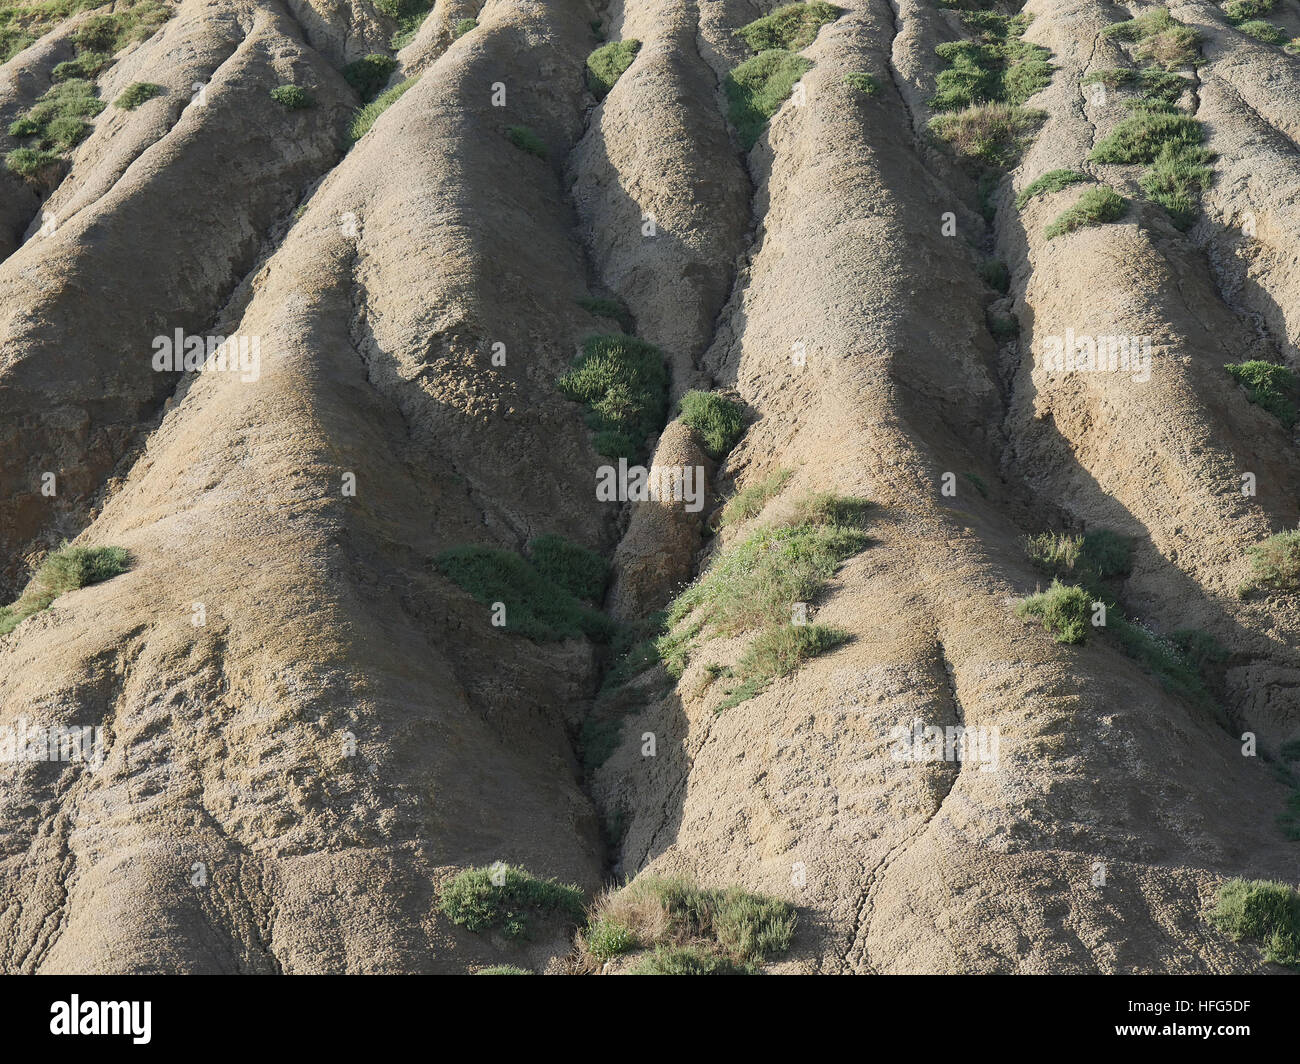 Erosion of the Mountain, Valley of the Temples, Vallee di Templi, Agrigento, Sicily, Italy Stock Photo